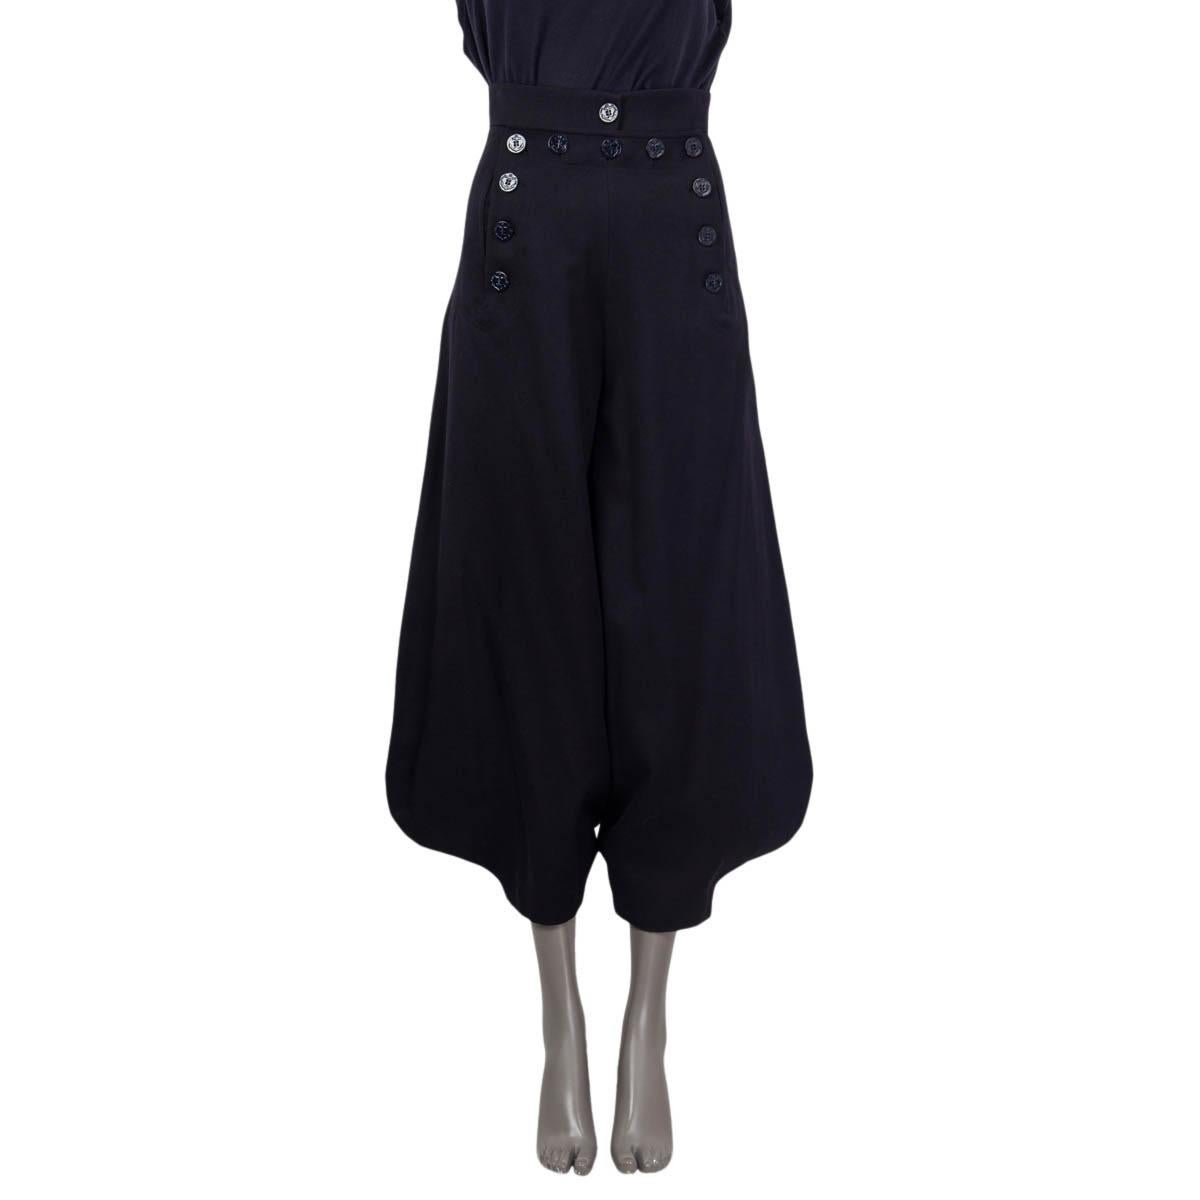 100% authentic Chloé balloon pants in dark blue virgin wool (63%) and cottom (37%). Features sailor buttons on the front and two slit pockets. Opens with eleven buttons on the front. Lined in anthracite blue cotton (100%). Have been worn and are in